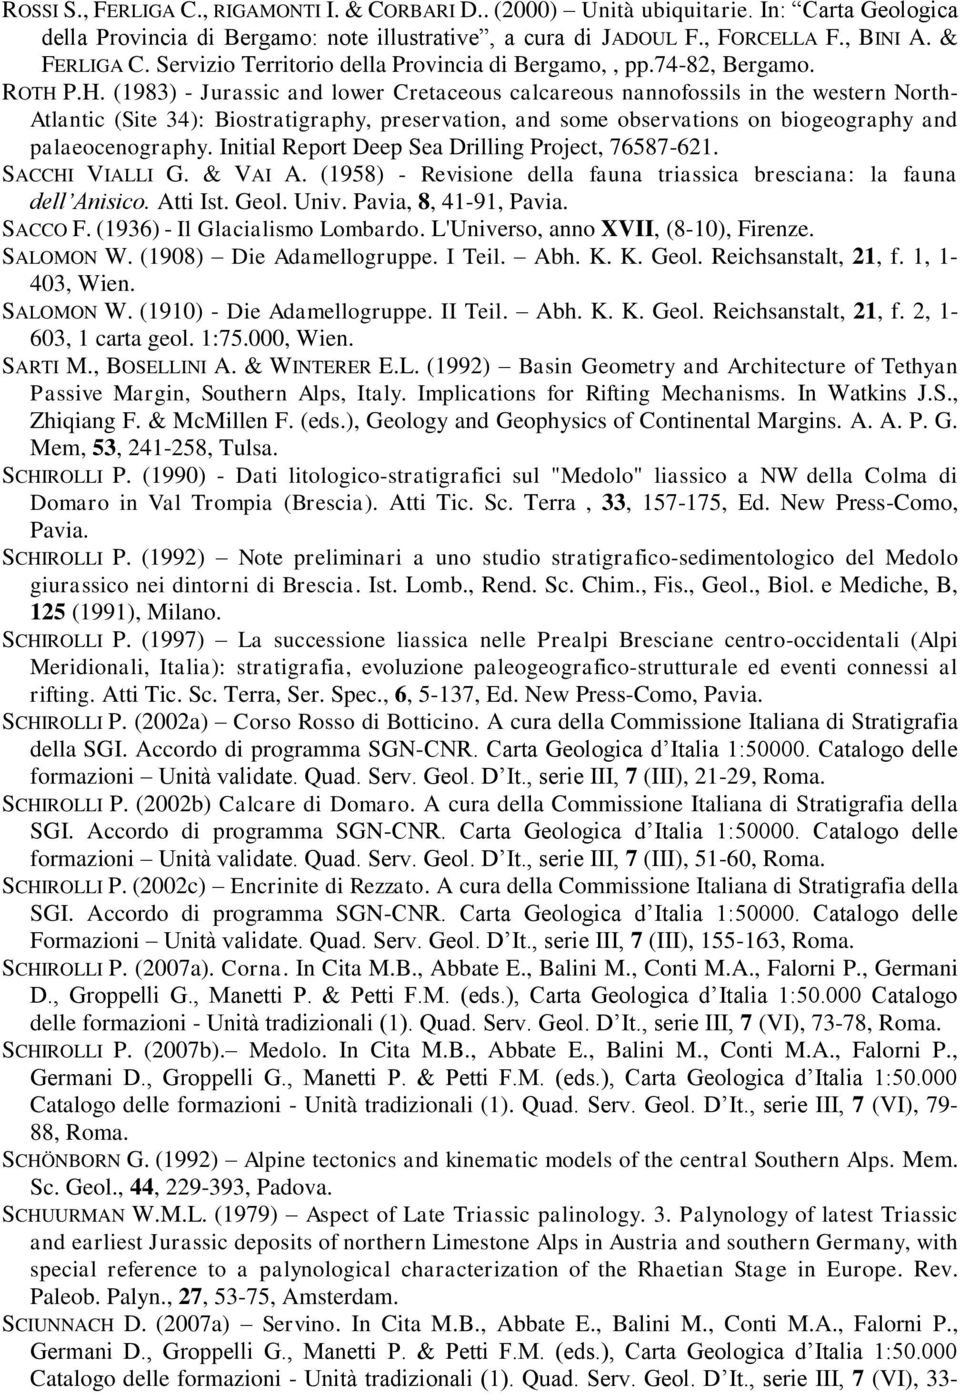 P.H. (1983) - Jurassic and lower Cretaceous calcareous nannofossils in the western North- Atlantic (Site 34): Biostratigraphy, preservation, and some observations on biogeography and palaeocenography.